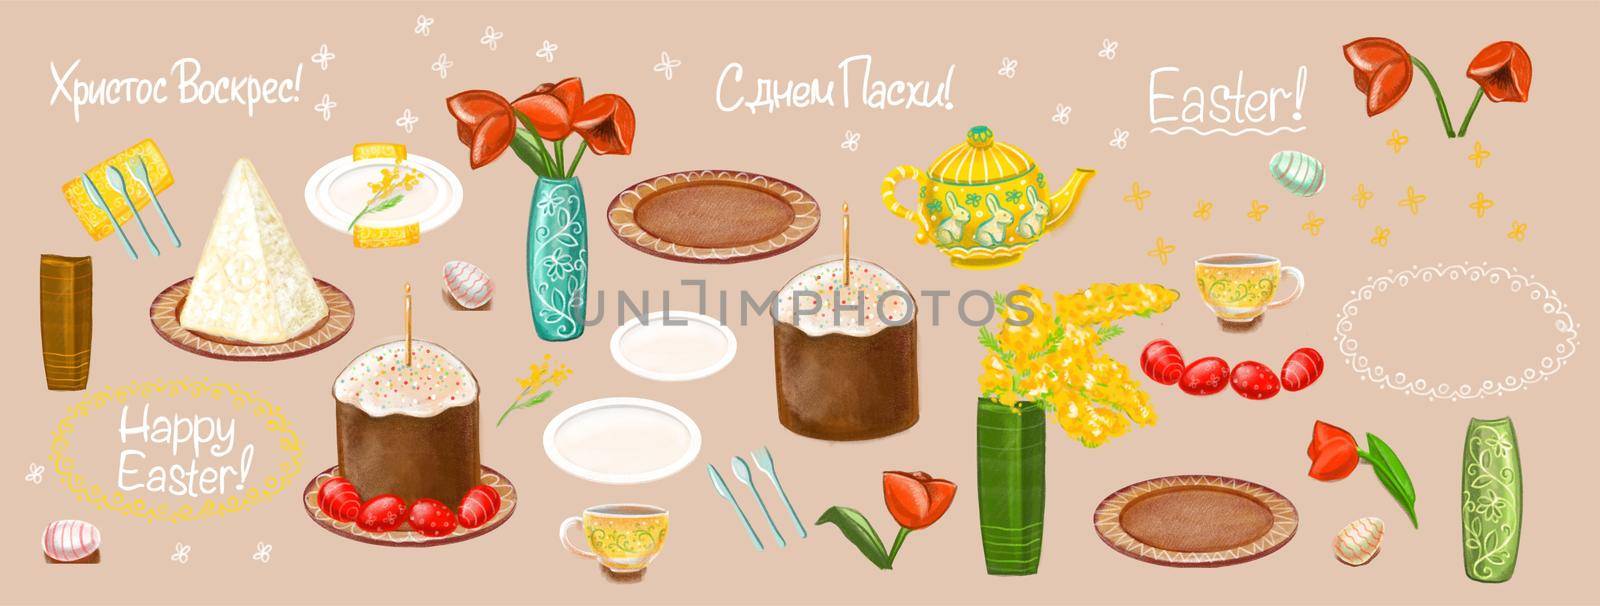 Easter set. Festive table for Easter. Easter cake and Easter,cutlery and flowers. The illustration is bright in the children's style with colored pencils.